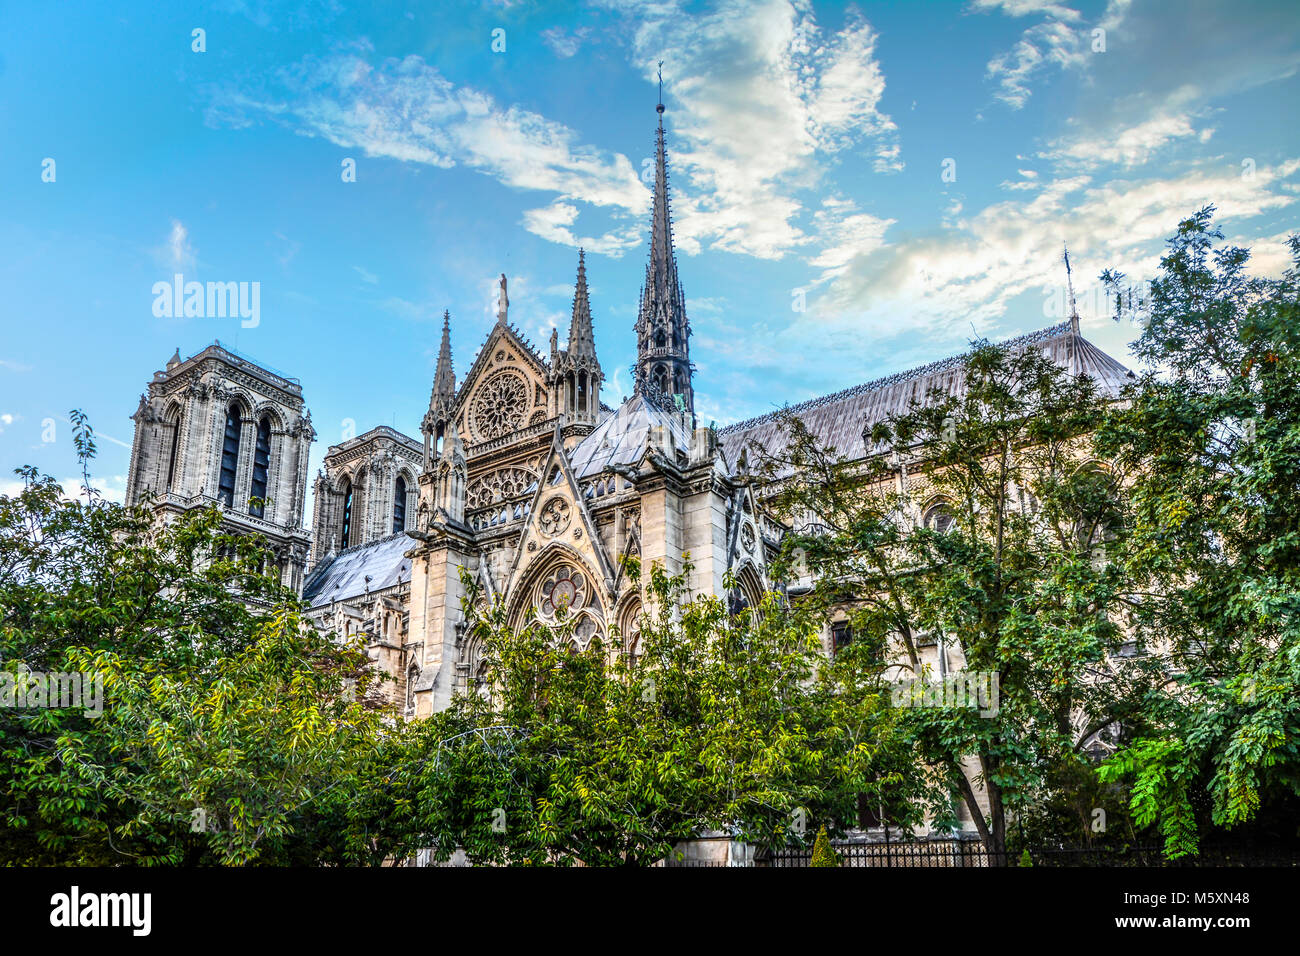 The ornate gothic architecture and spires on the side of Notre Dame Cathedral, Paris France on a sunny summer day with trees in the foreground Stock Photo